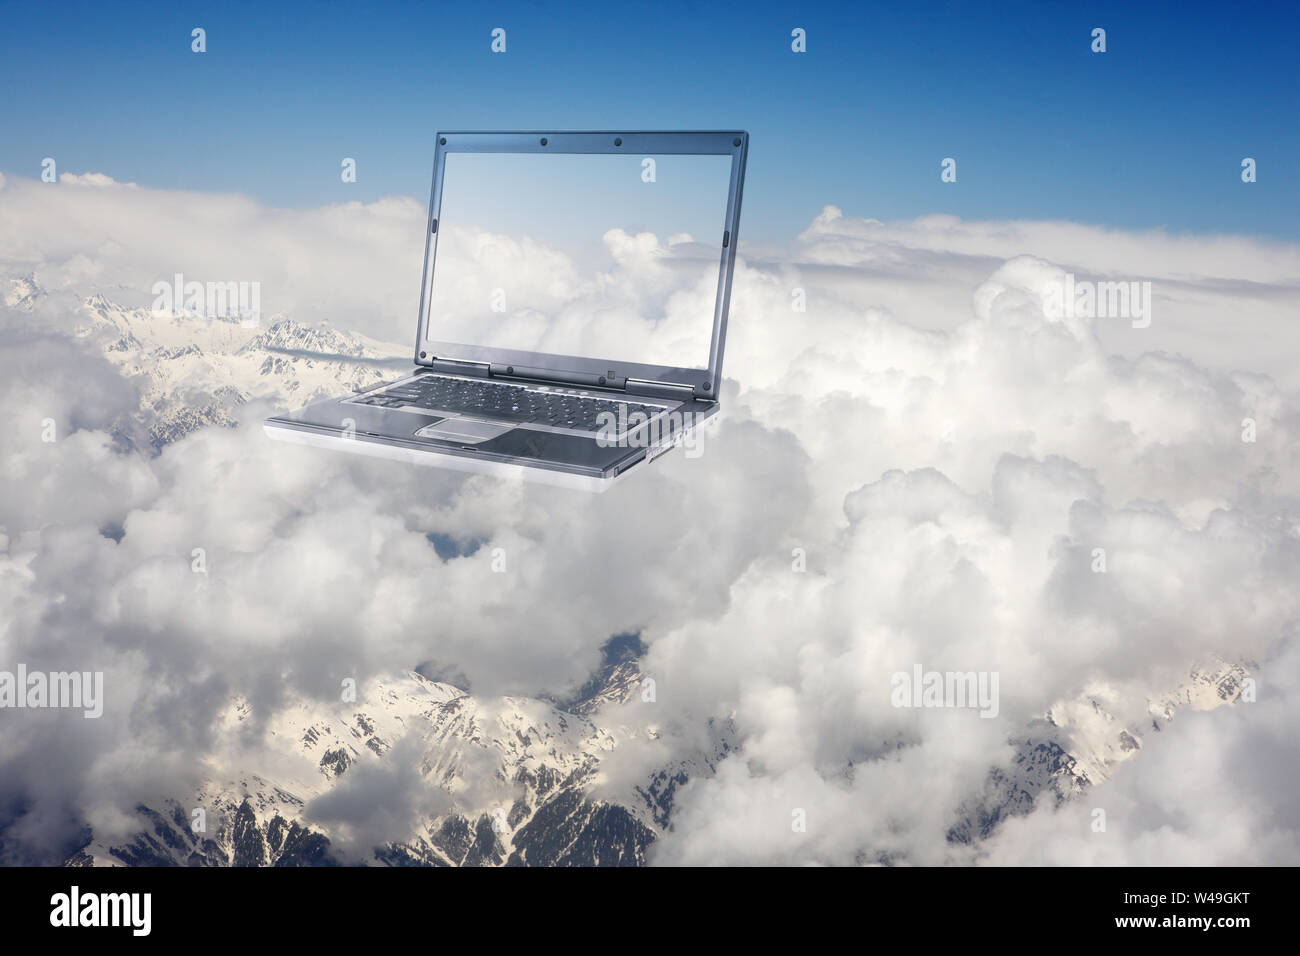 Laptop floating in clouds Stock Photo